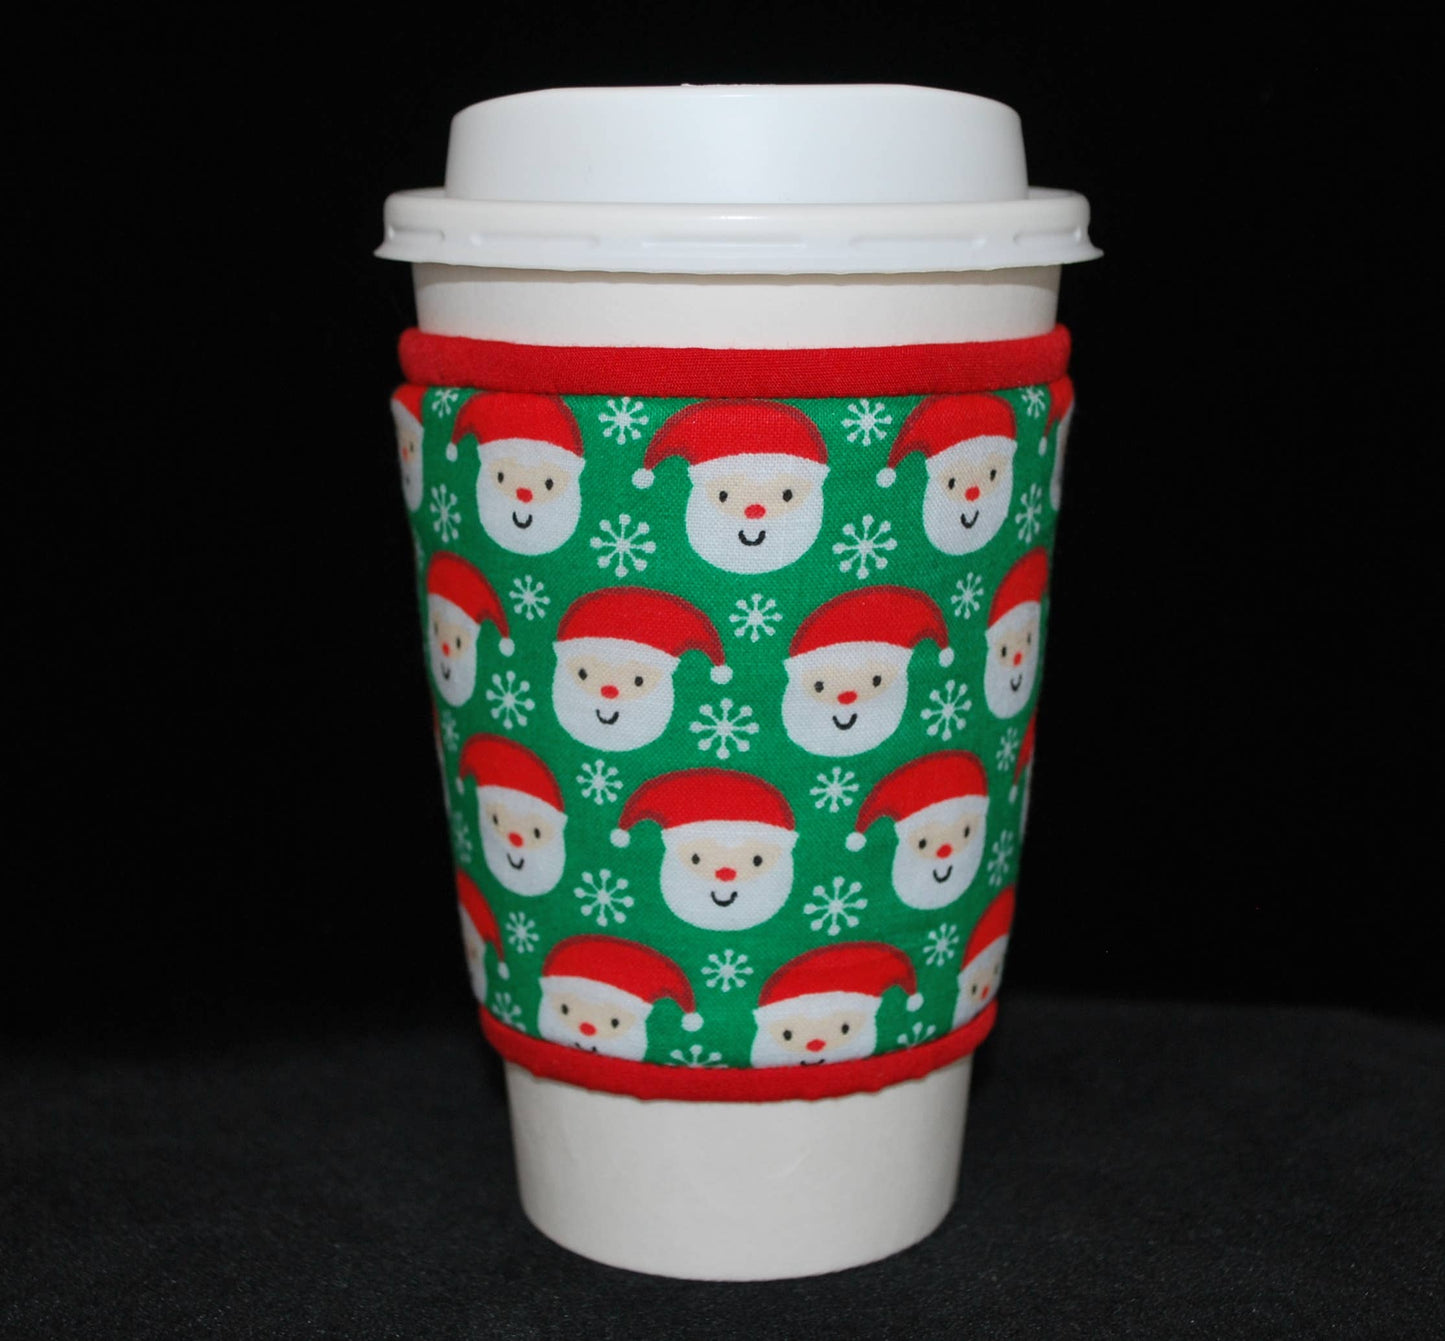 Cup Cozee - Small, Smiling Santa Heads On Green